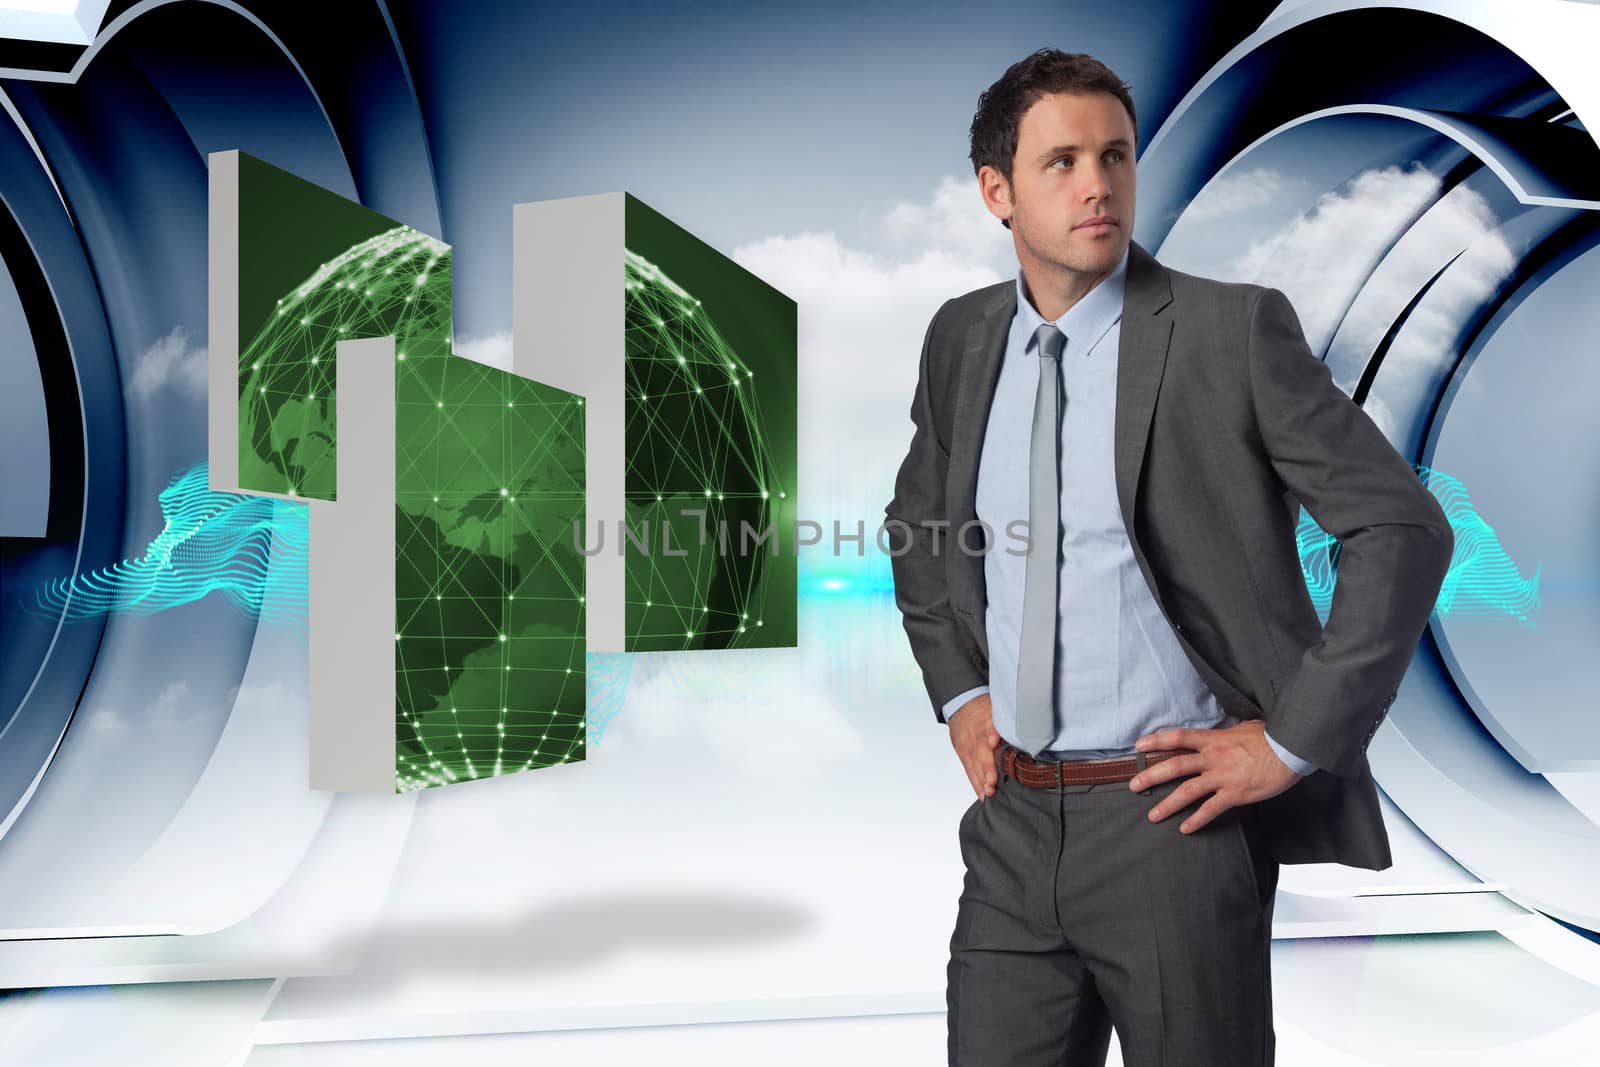 Serious businessman with hands on hips against abstract blue design on clouds in structure 